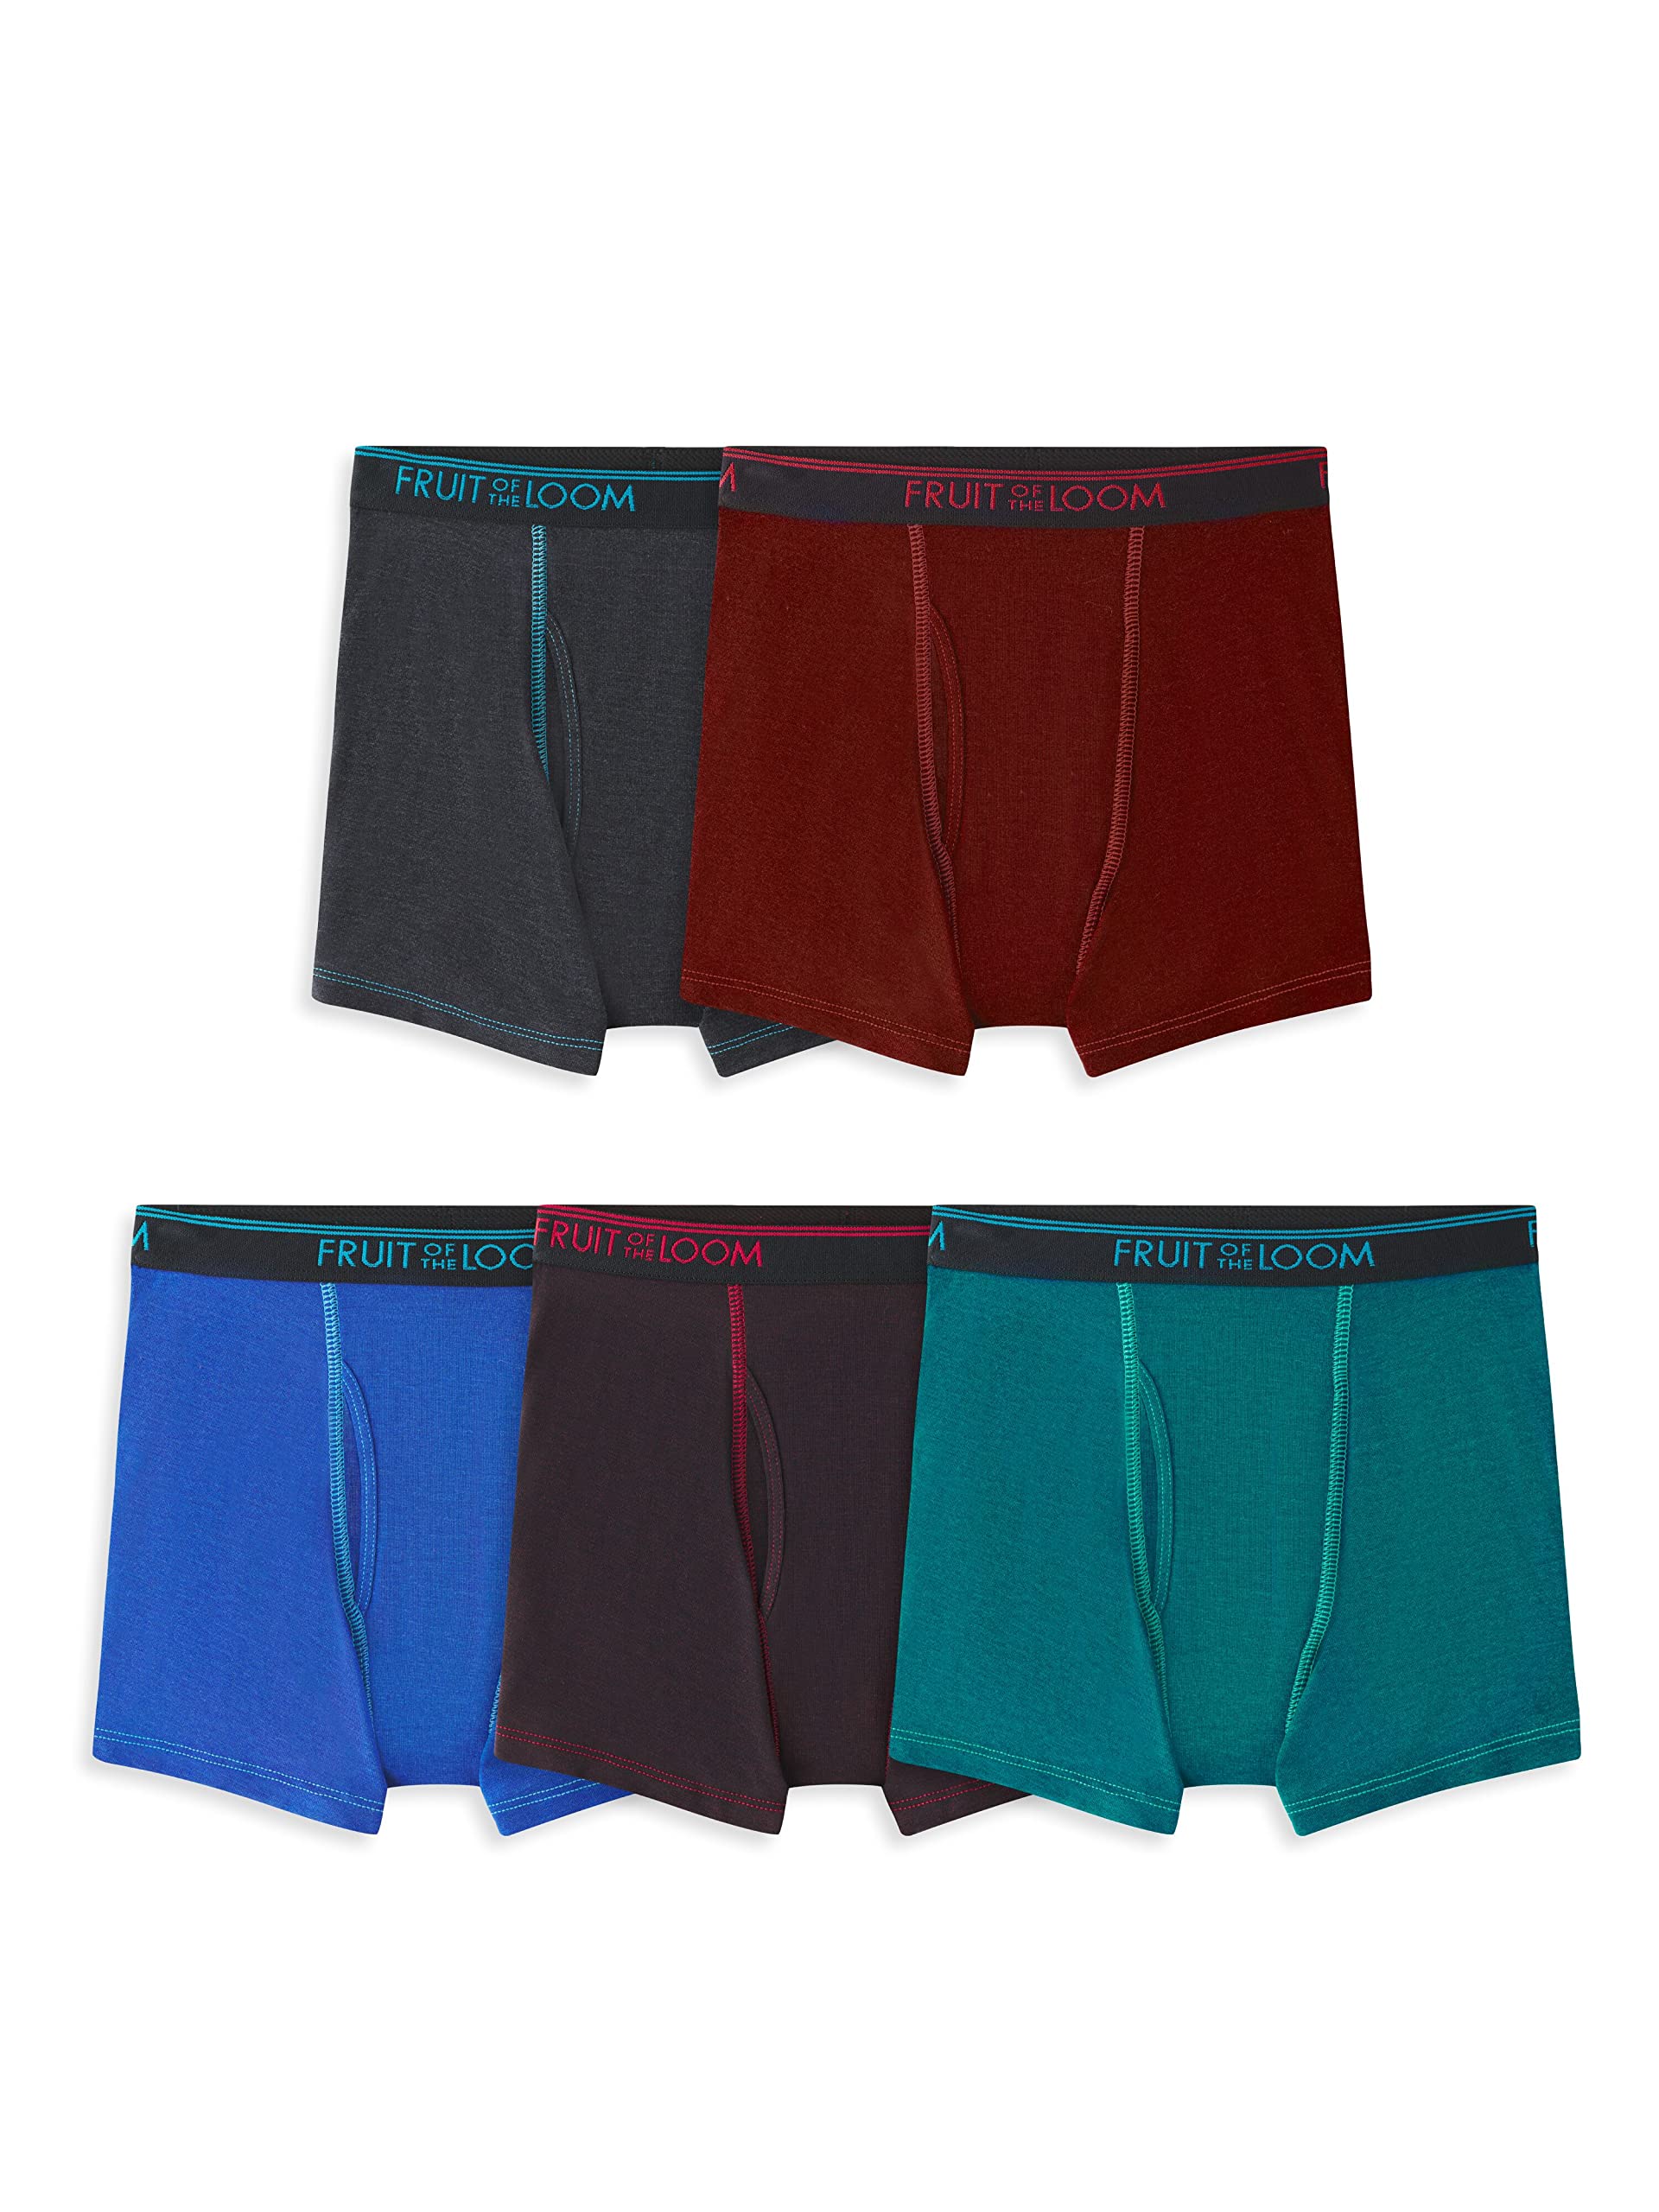 Fruit of the Loom Boys' 360 Stretch Boxer Briefs